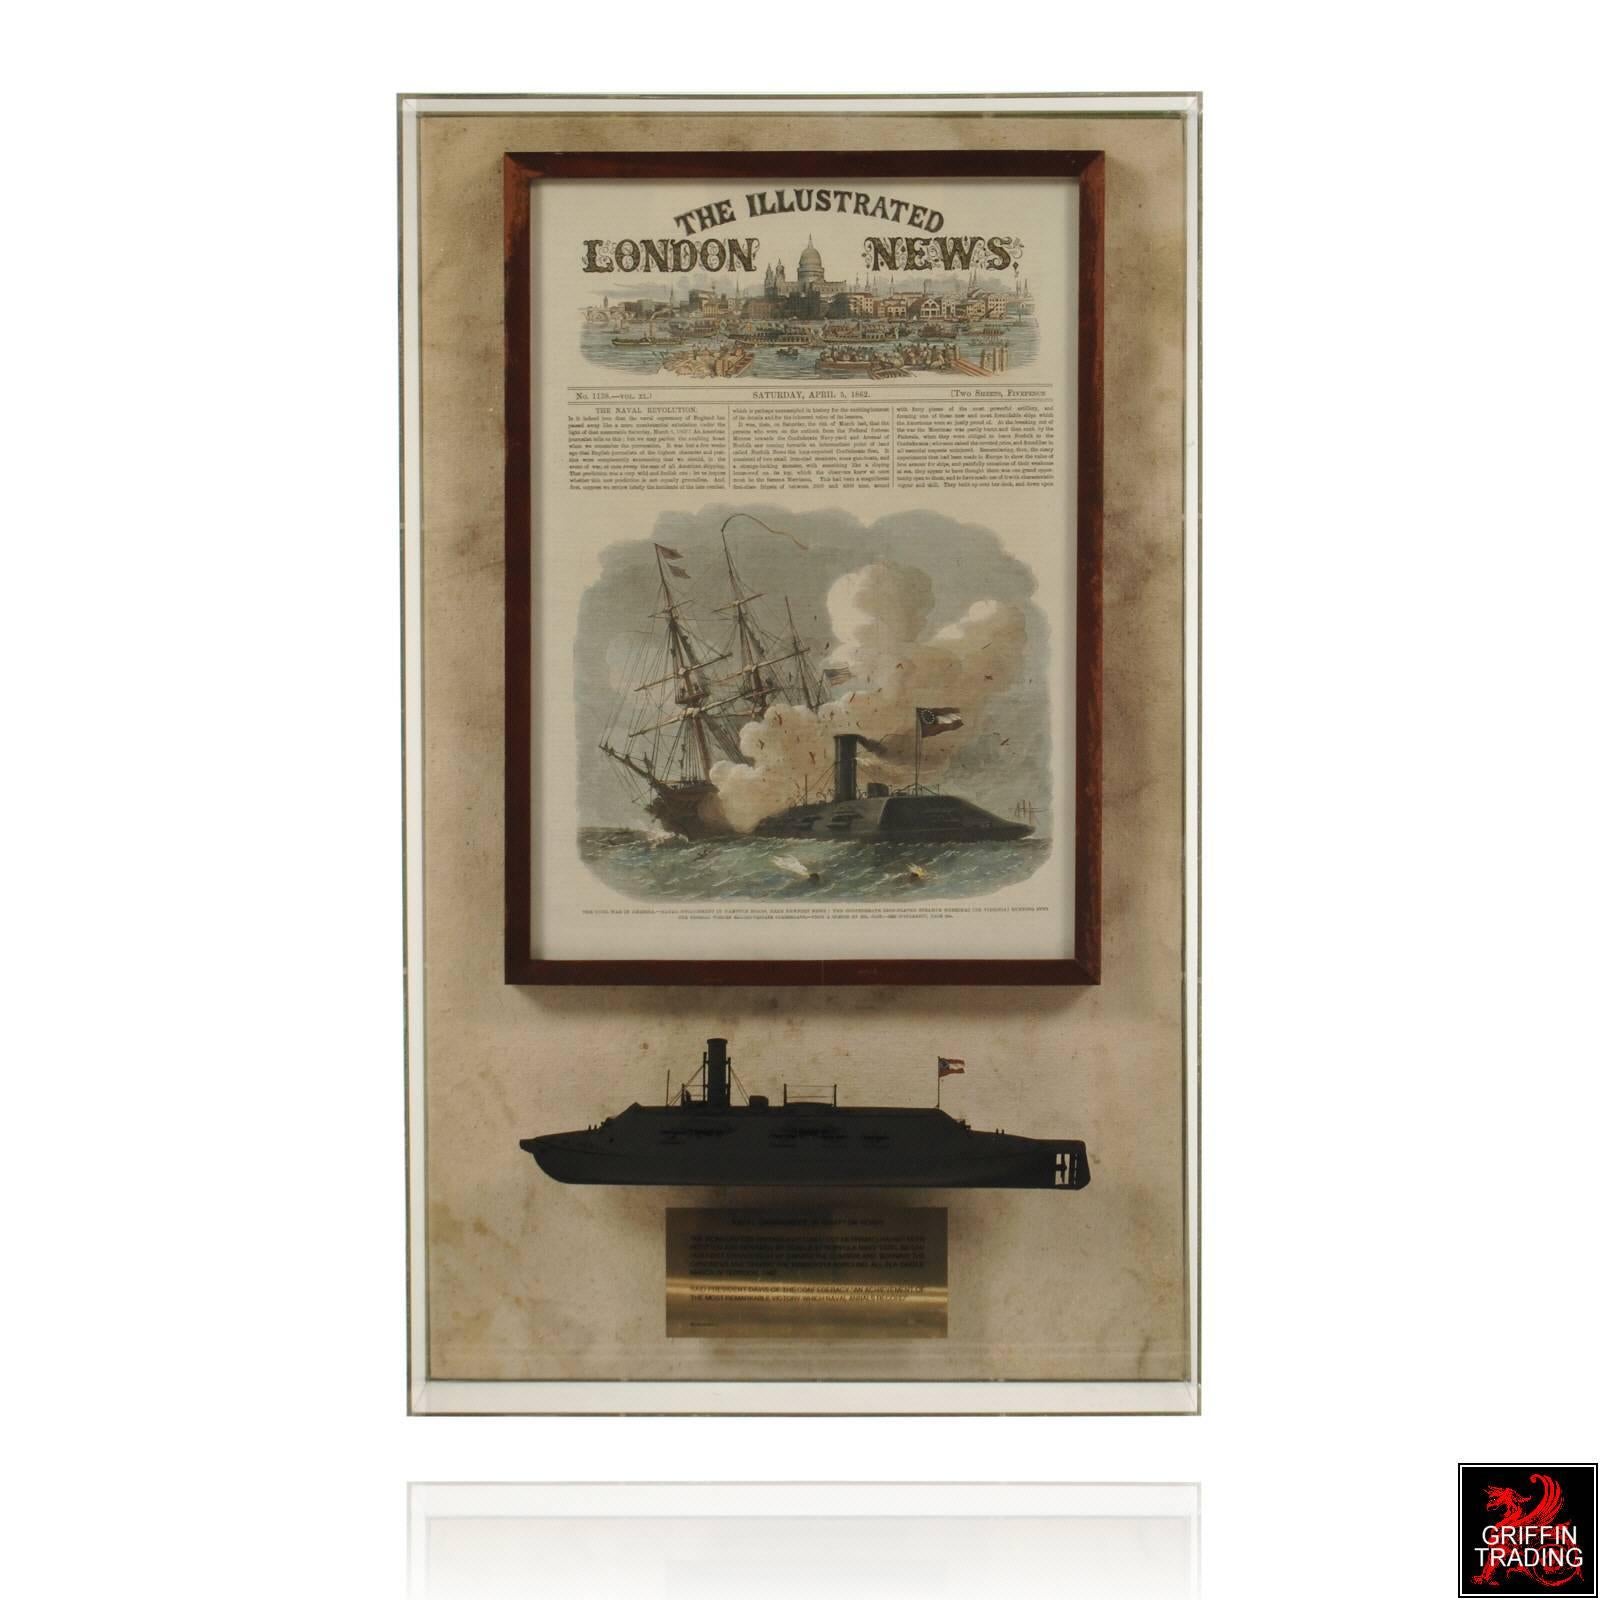 This is a superb scale model of the CSS Virginia, along with the illustrated London newspaper reporting on the Naval battle of Hampton Roads, along with an illustration showing the Virginia ramming into the USS Cumberland, a large three masted,